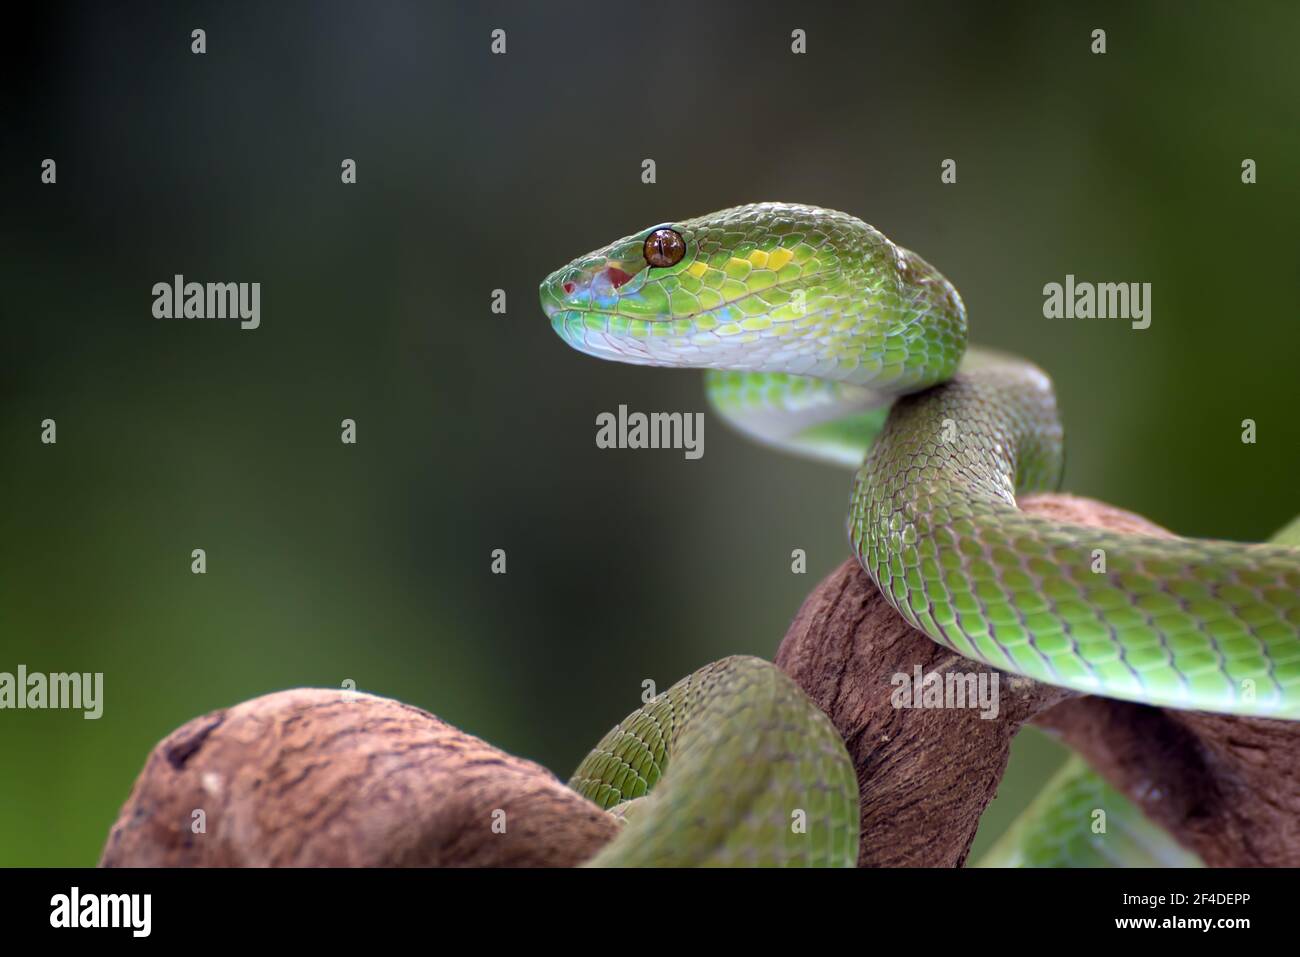 White-lipped island pit viper coiled around a tree branch, Indonesia Stock Photo